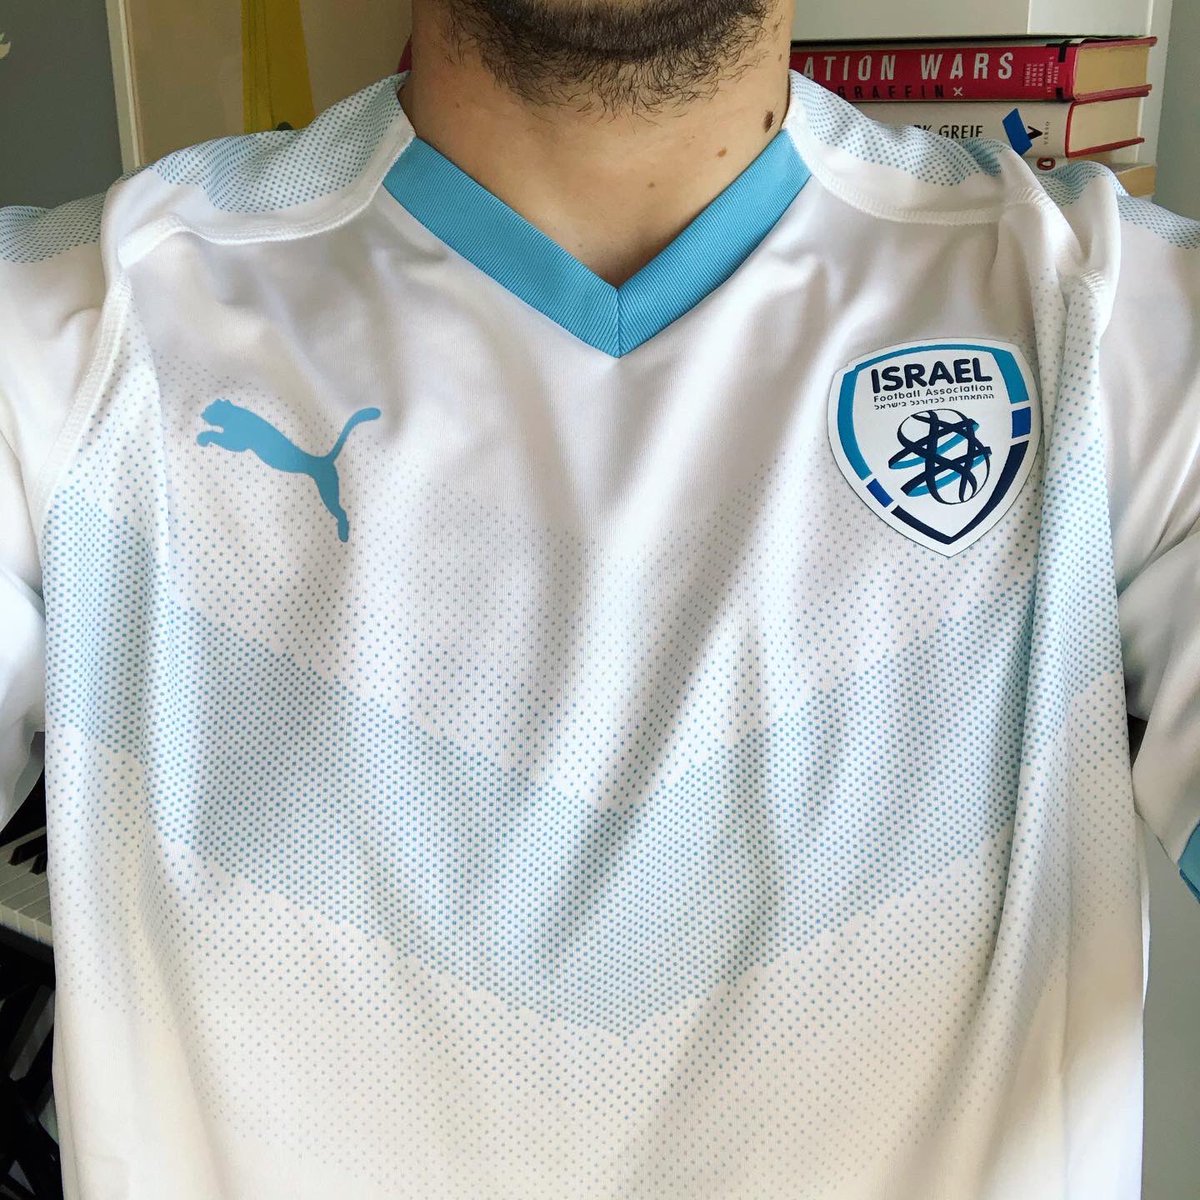 . @ISRAELFA Away Kit, 2018 @PUMAA souvenir from last year’s trip to Jerusalem. Israel is not exactly known for being a footballing powerhouse, but this away shirt looks really cool. #ClassicFootballShirts  #HomeShirt  #FootballShirtCollection